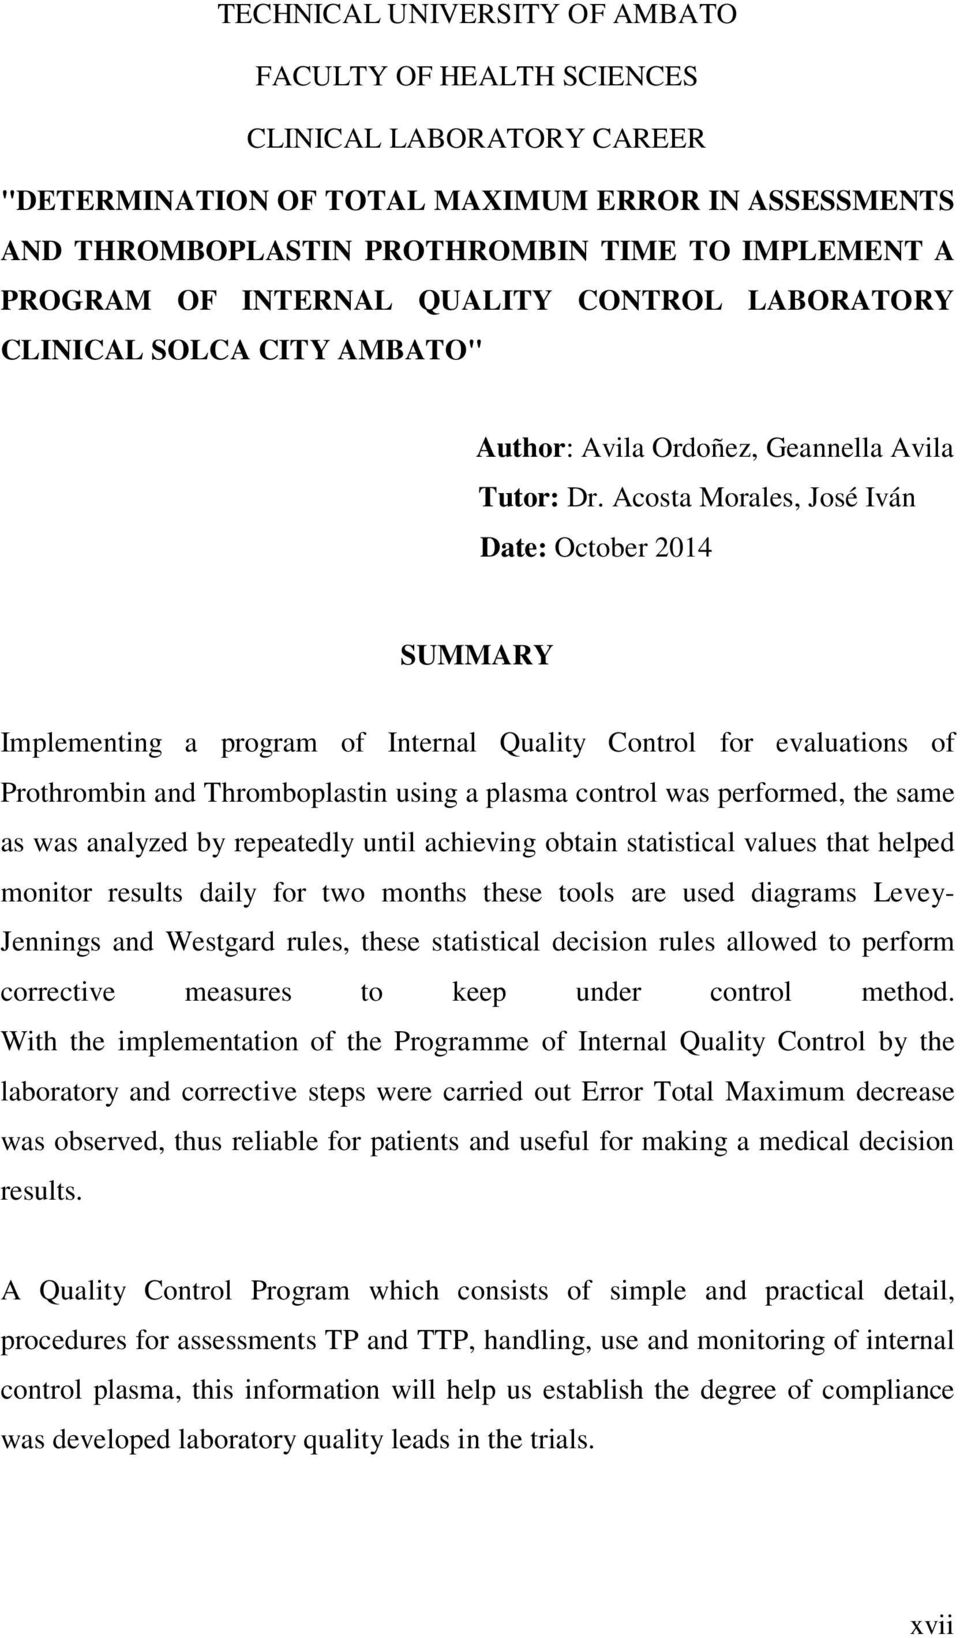 Acosta Morales, José Iván Date: October 2014 SUMMARY Implementing a program of Internal Quality Control for evaluations of Prothrombin and Thromboplastin using a plasma control was performed, the